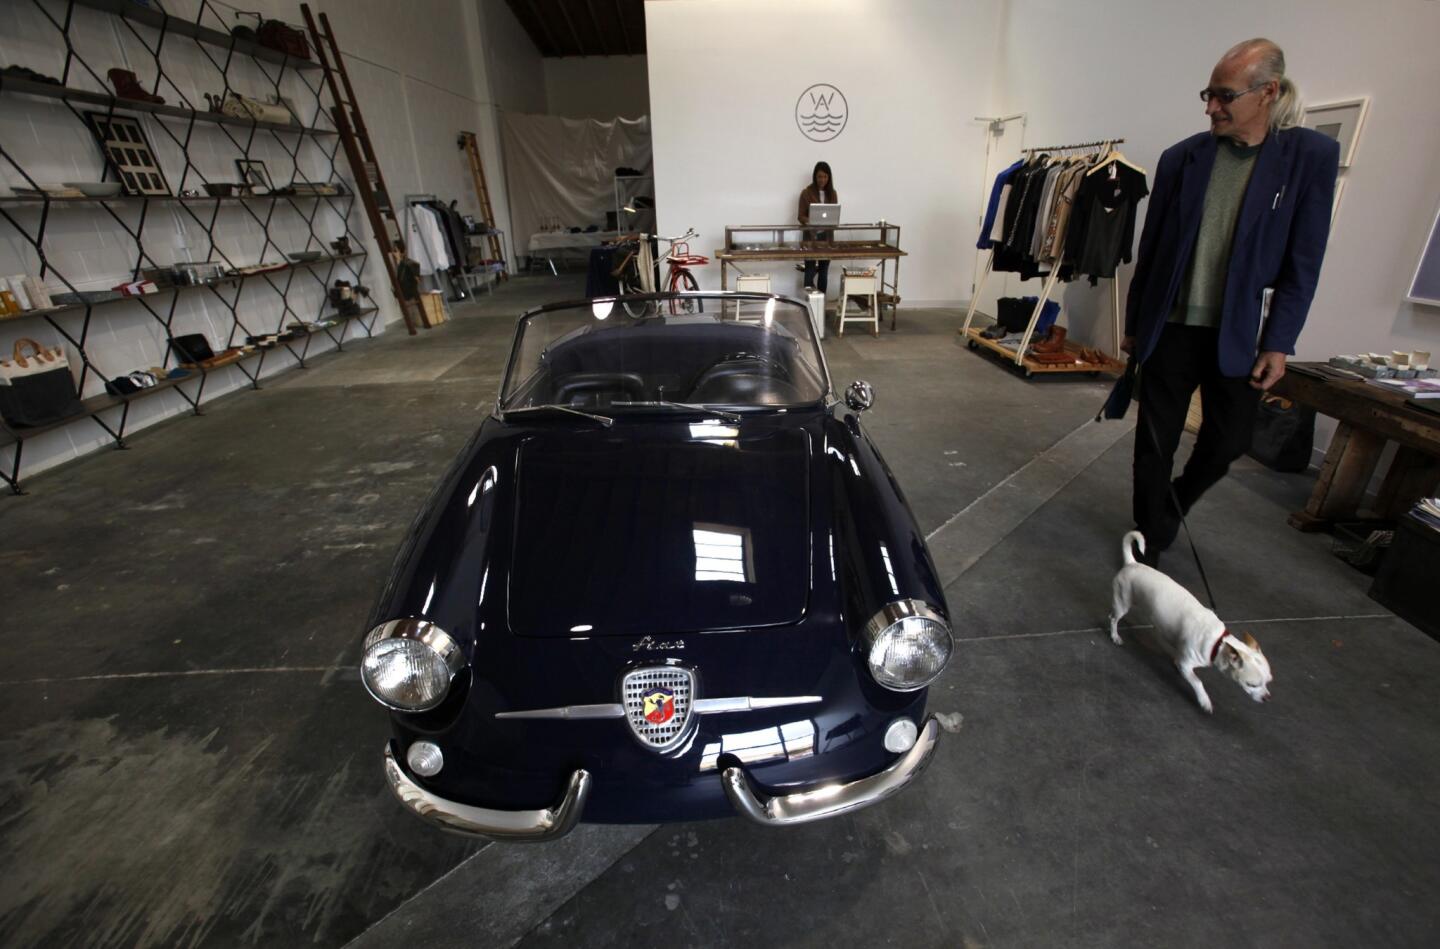 This smartly styled design gallery opened two weeks ago with an eclectic mix including furniture by downtown designer Tim Campbell, ceramics by Echo Park potter Victoria Morris and made-in-L.A. Weiss watches. "It's a California edit on everything," creative director Raan Parton said. One exception: The 1959 Fiat Abarth 750 Spider sitting in the middle of the modern, skylighted space. Here, Drew Lesso walks past the car, which is for sale.